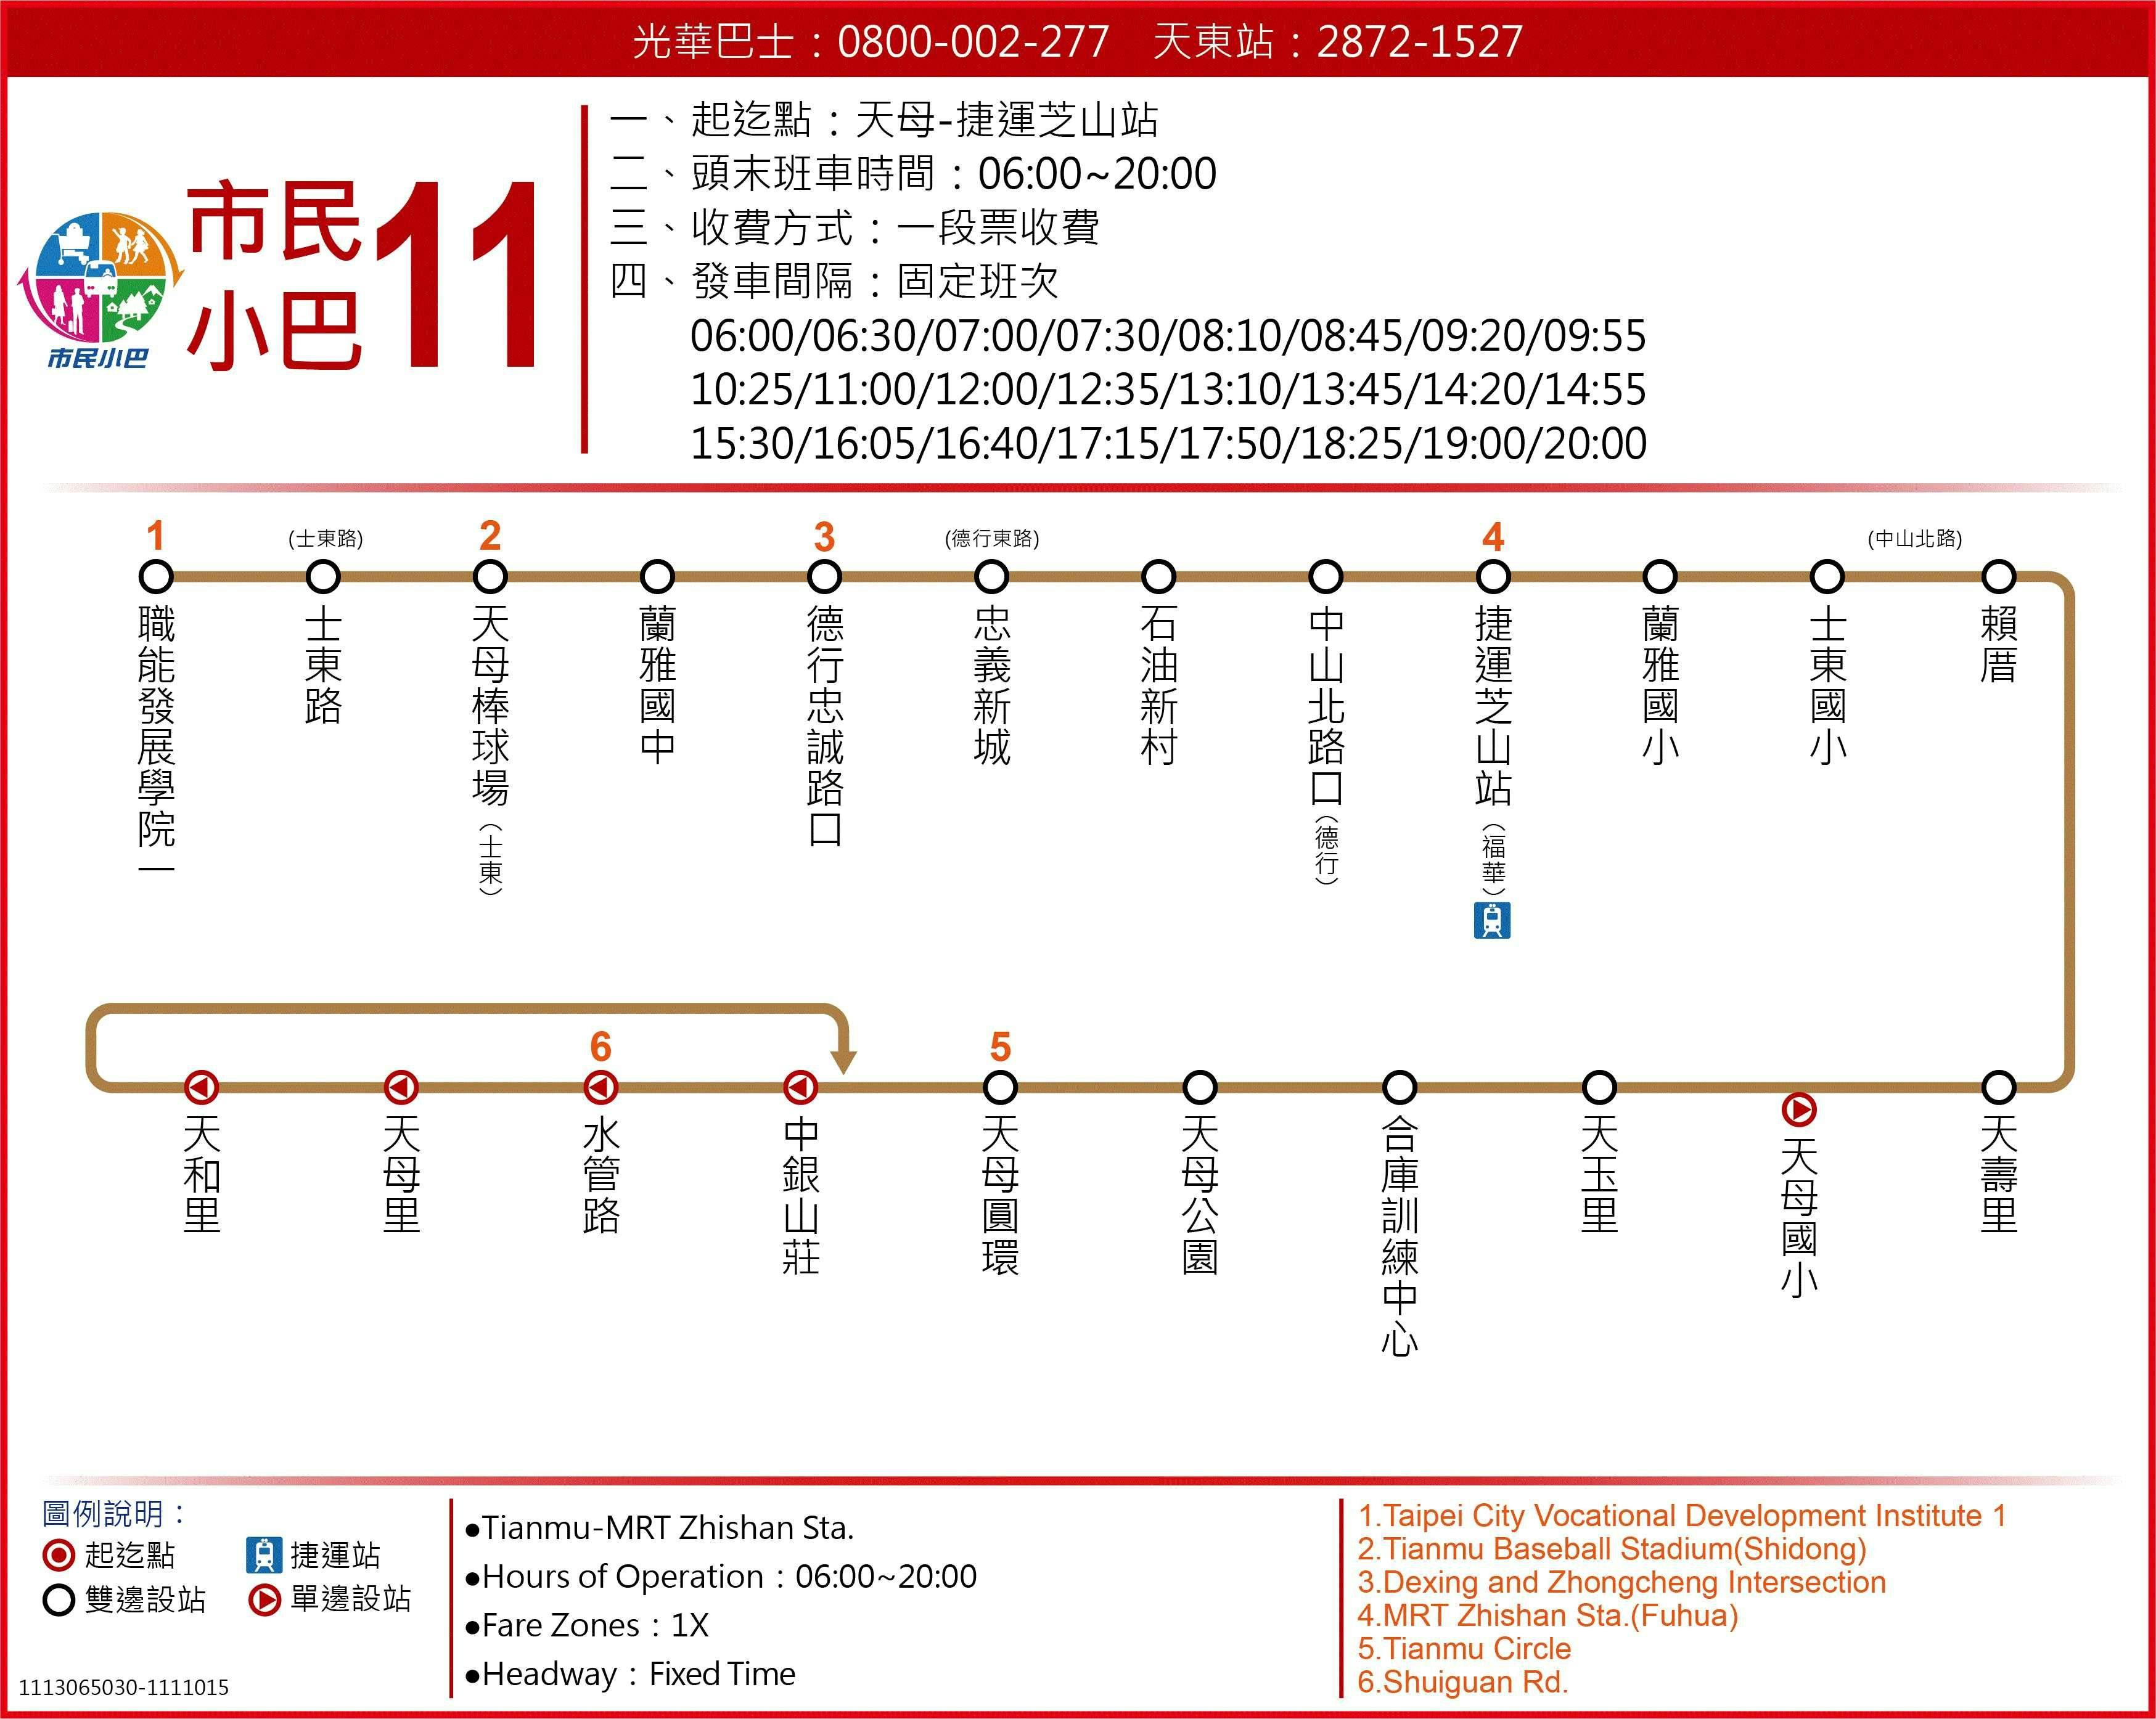 M11Route Map-台北市 Bus